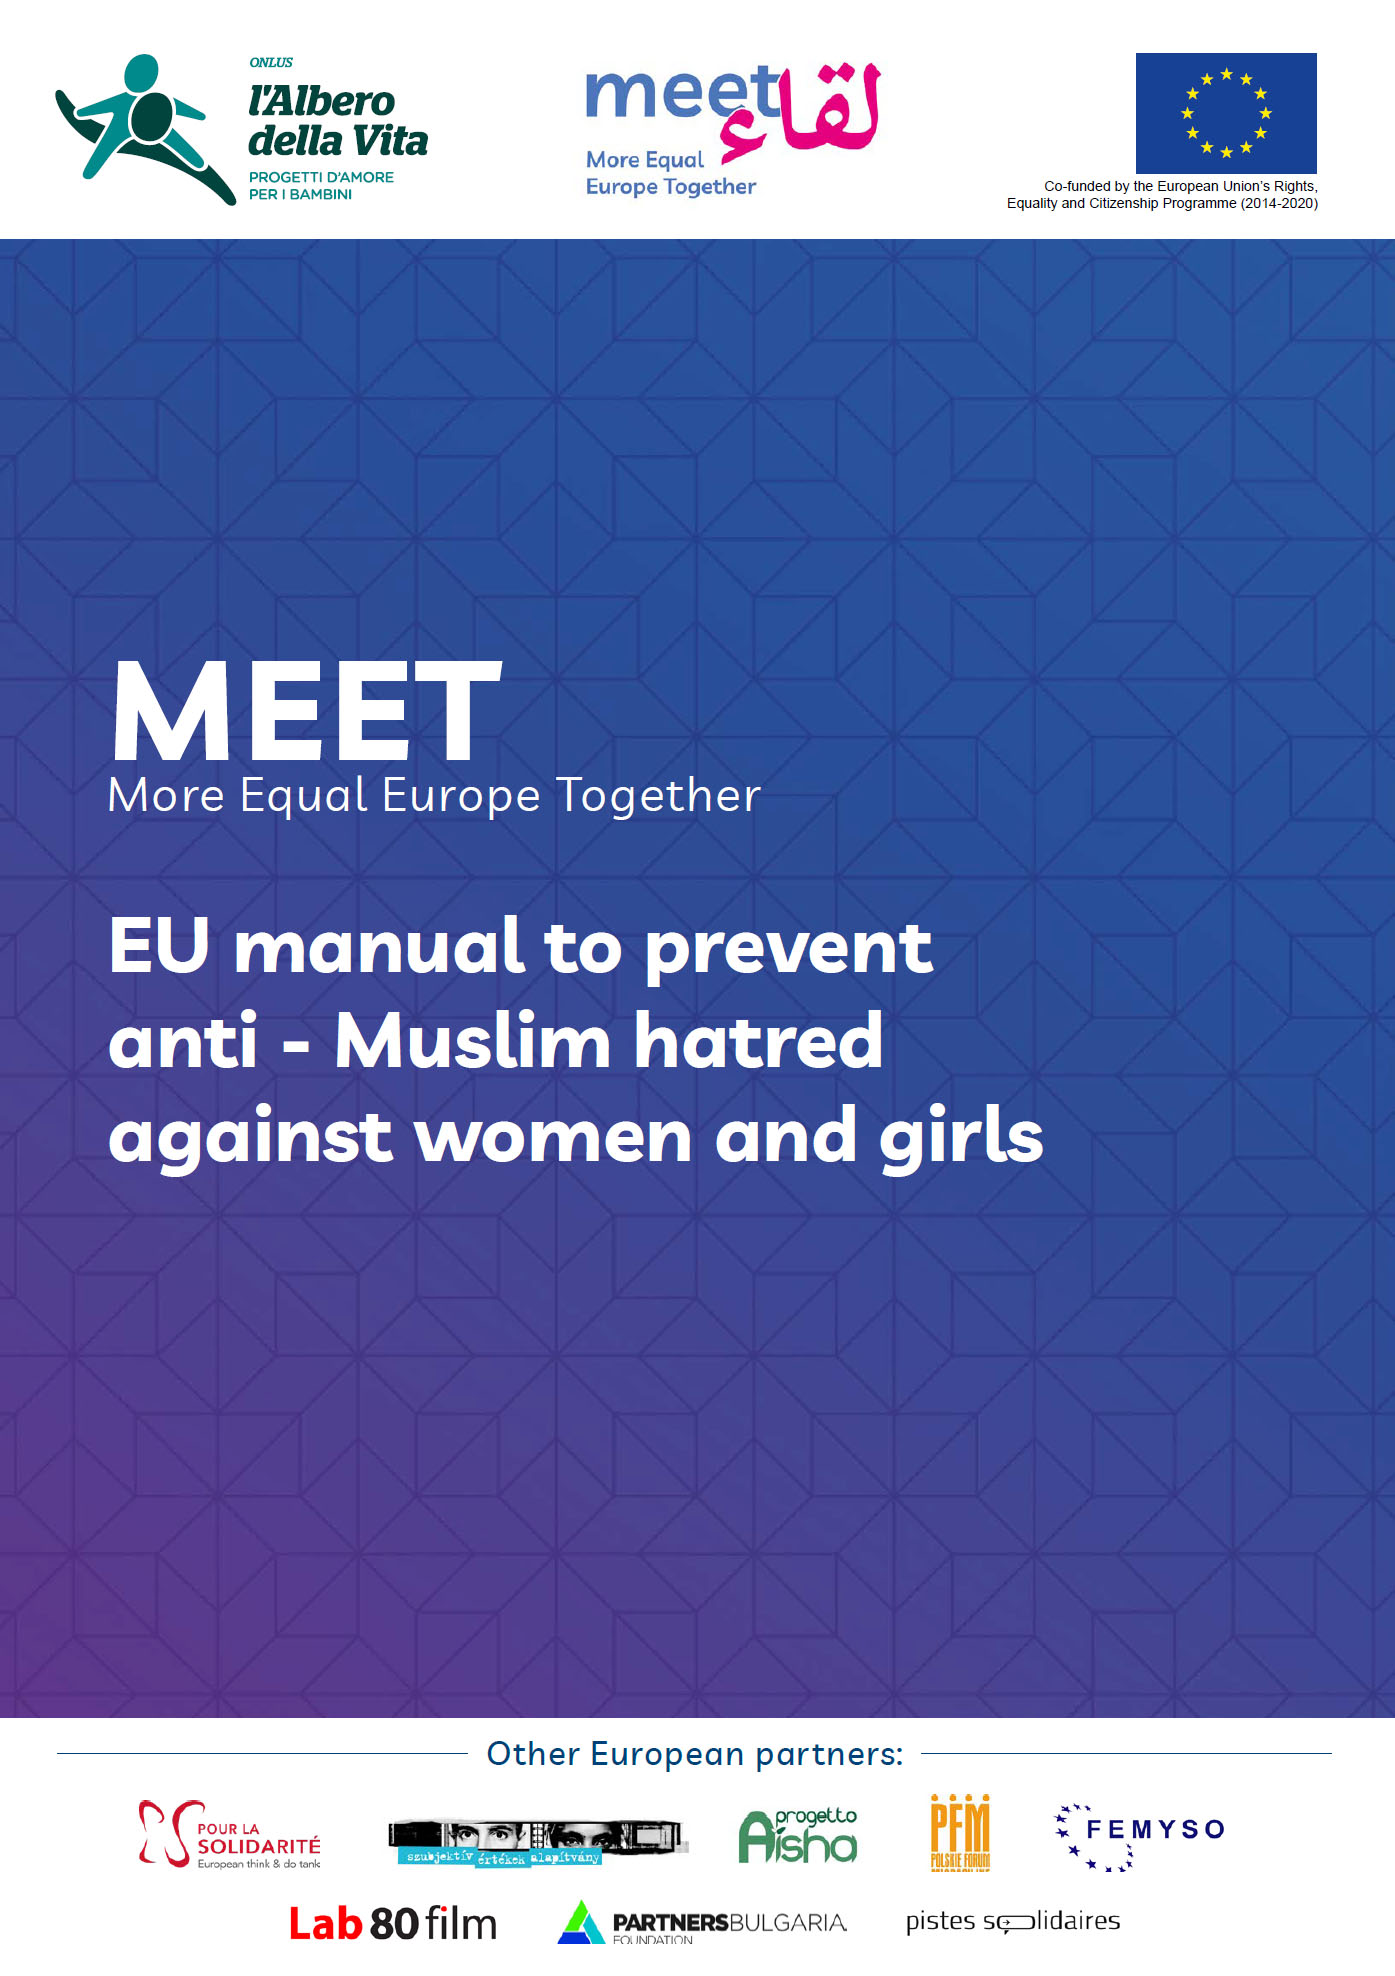 EU manual to prevent anti - Muslim hatred against women and girls